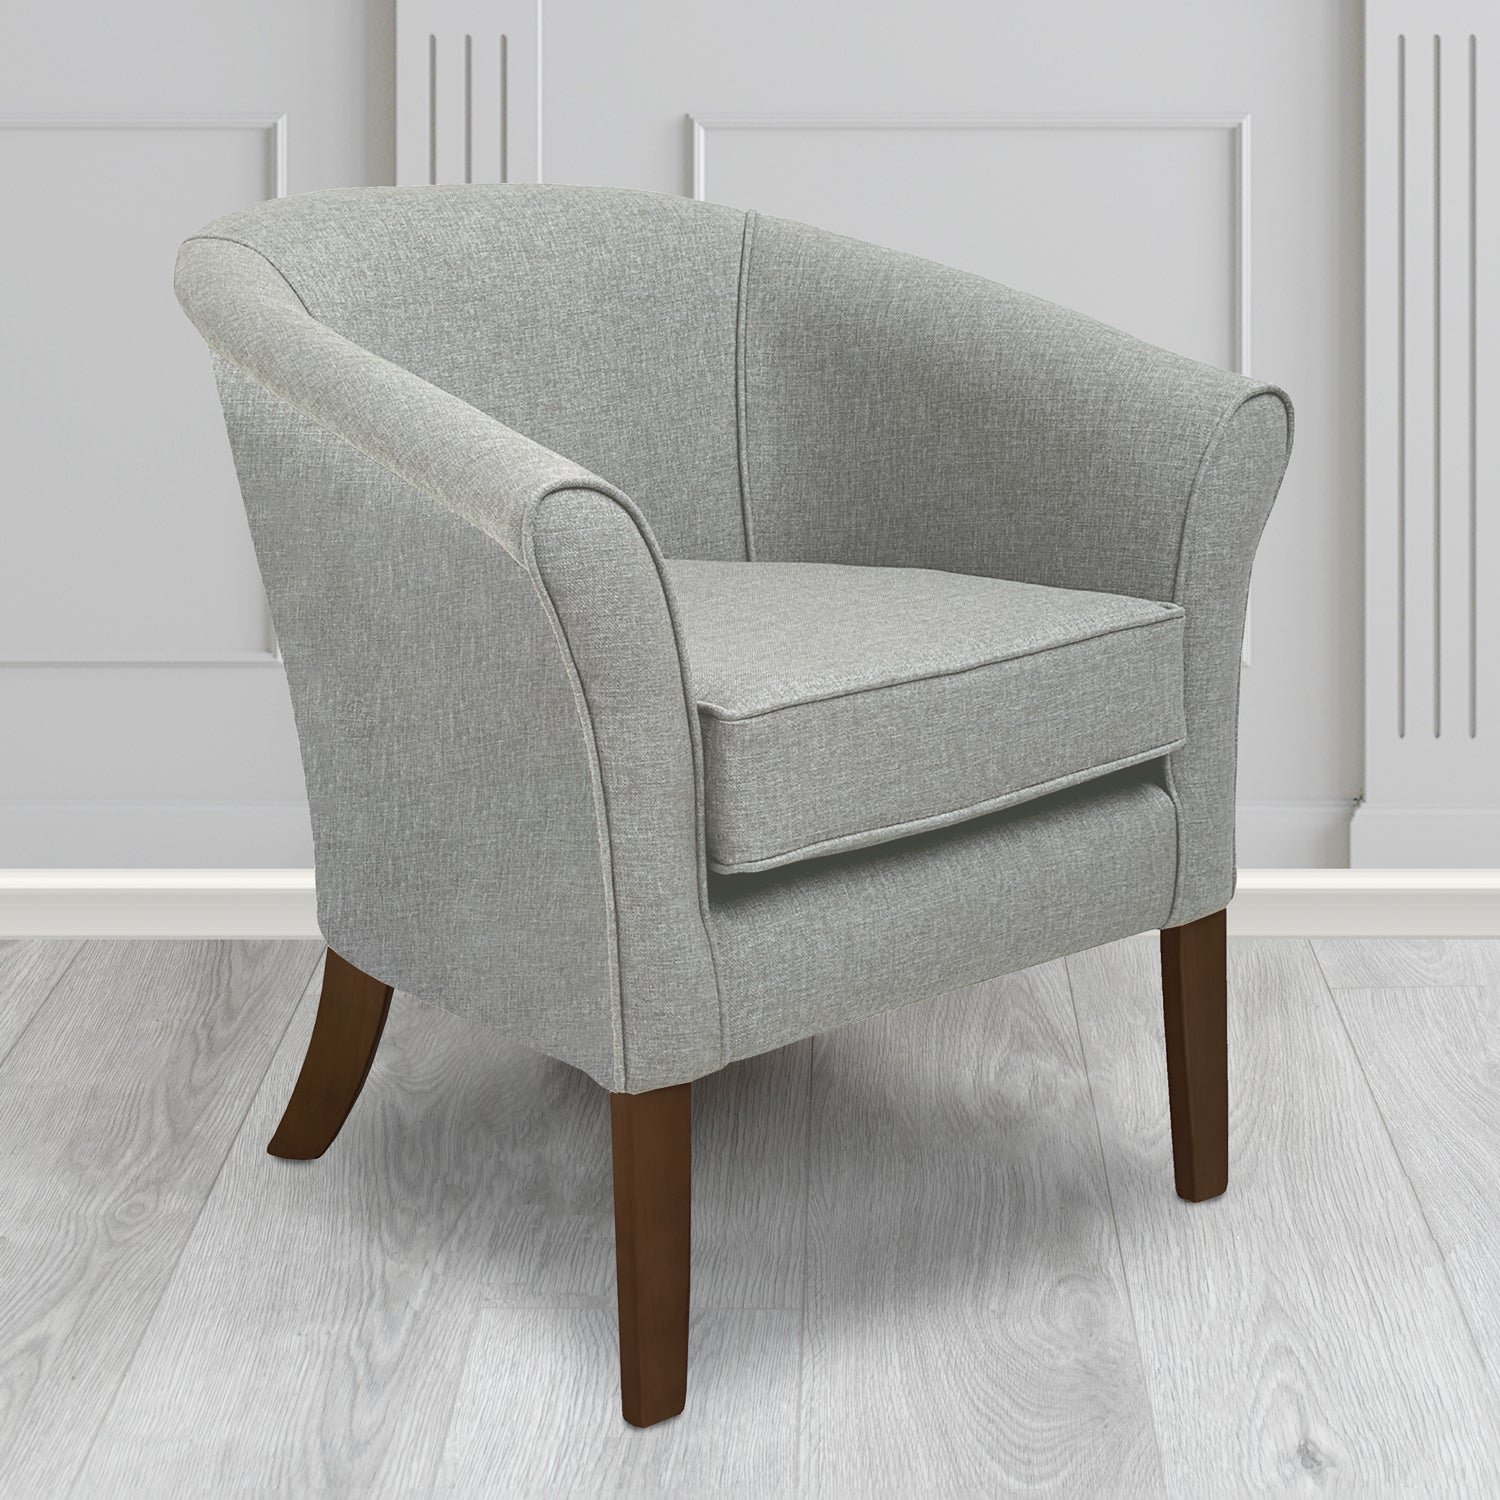 Aspen Tub Chair in Marna 901 Silver Crib 5 Fabric - Antimicrobial, Stain Resistant & Waterproof - The Tub Chair Shop